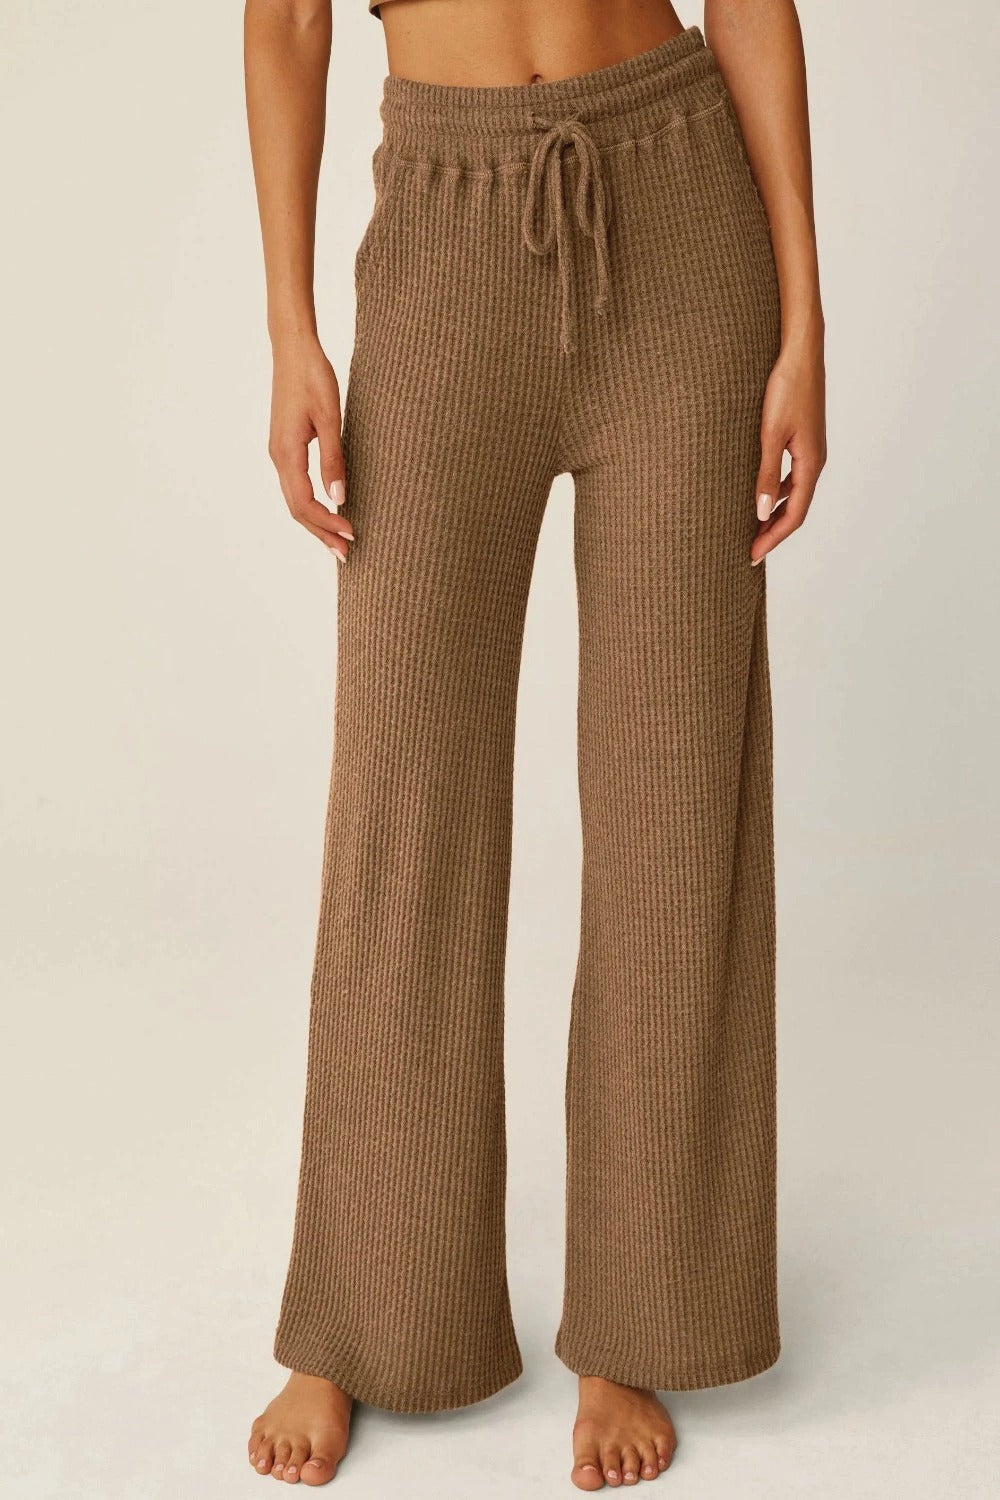 Free Style Pant in Toffee